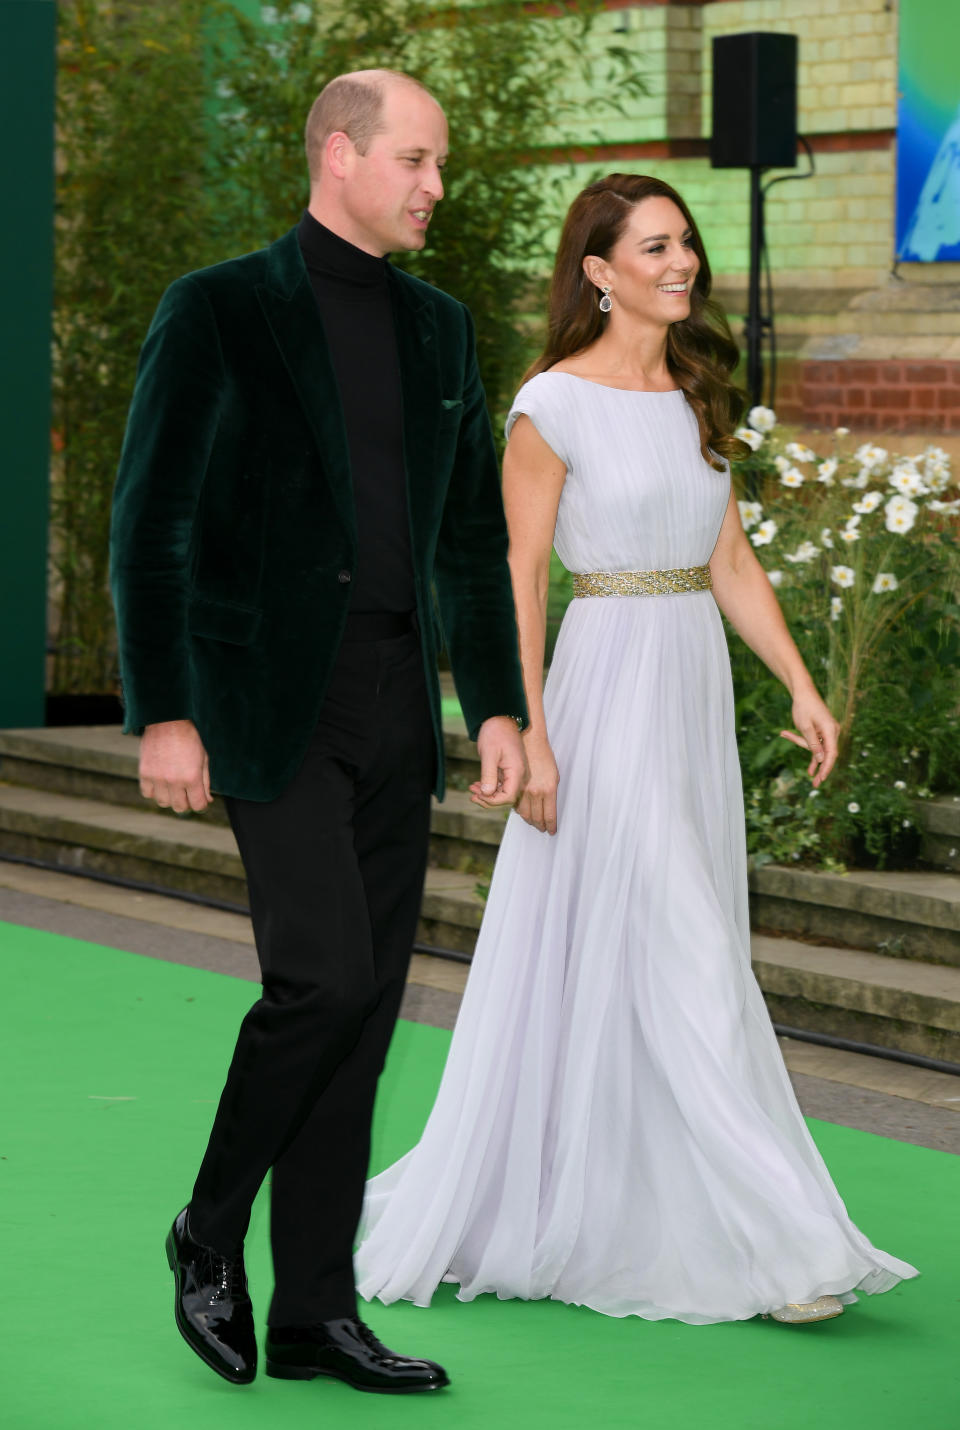 Prince William and Kate Middleton attend the 2021 Earthshot Prize ceremony at Alexandra Palace in London. - Credit: Splash